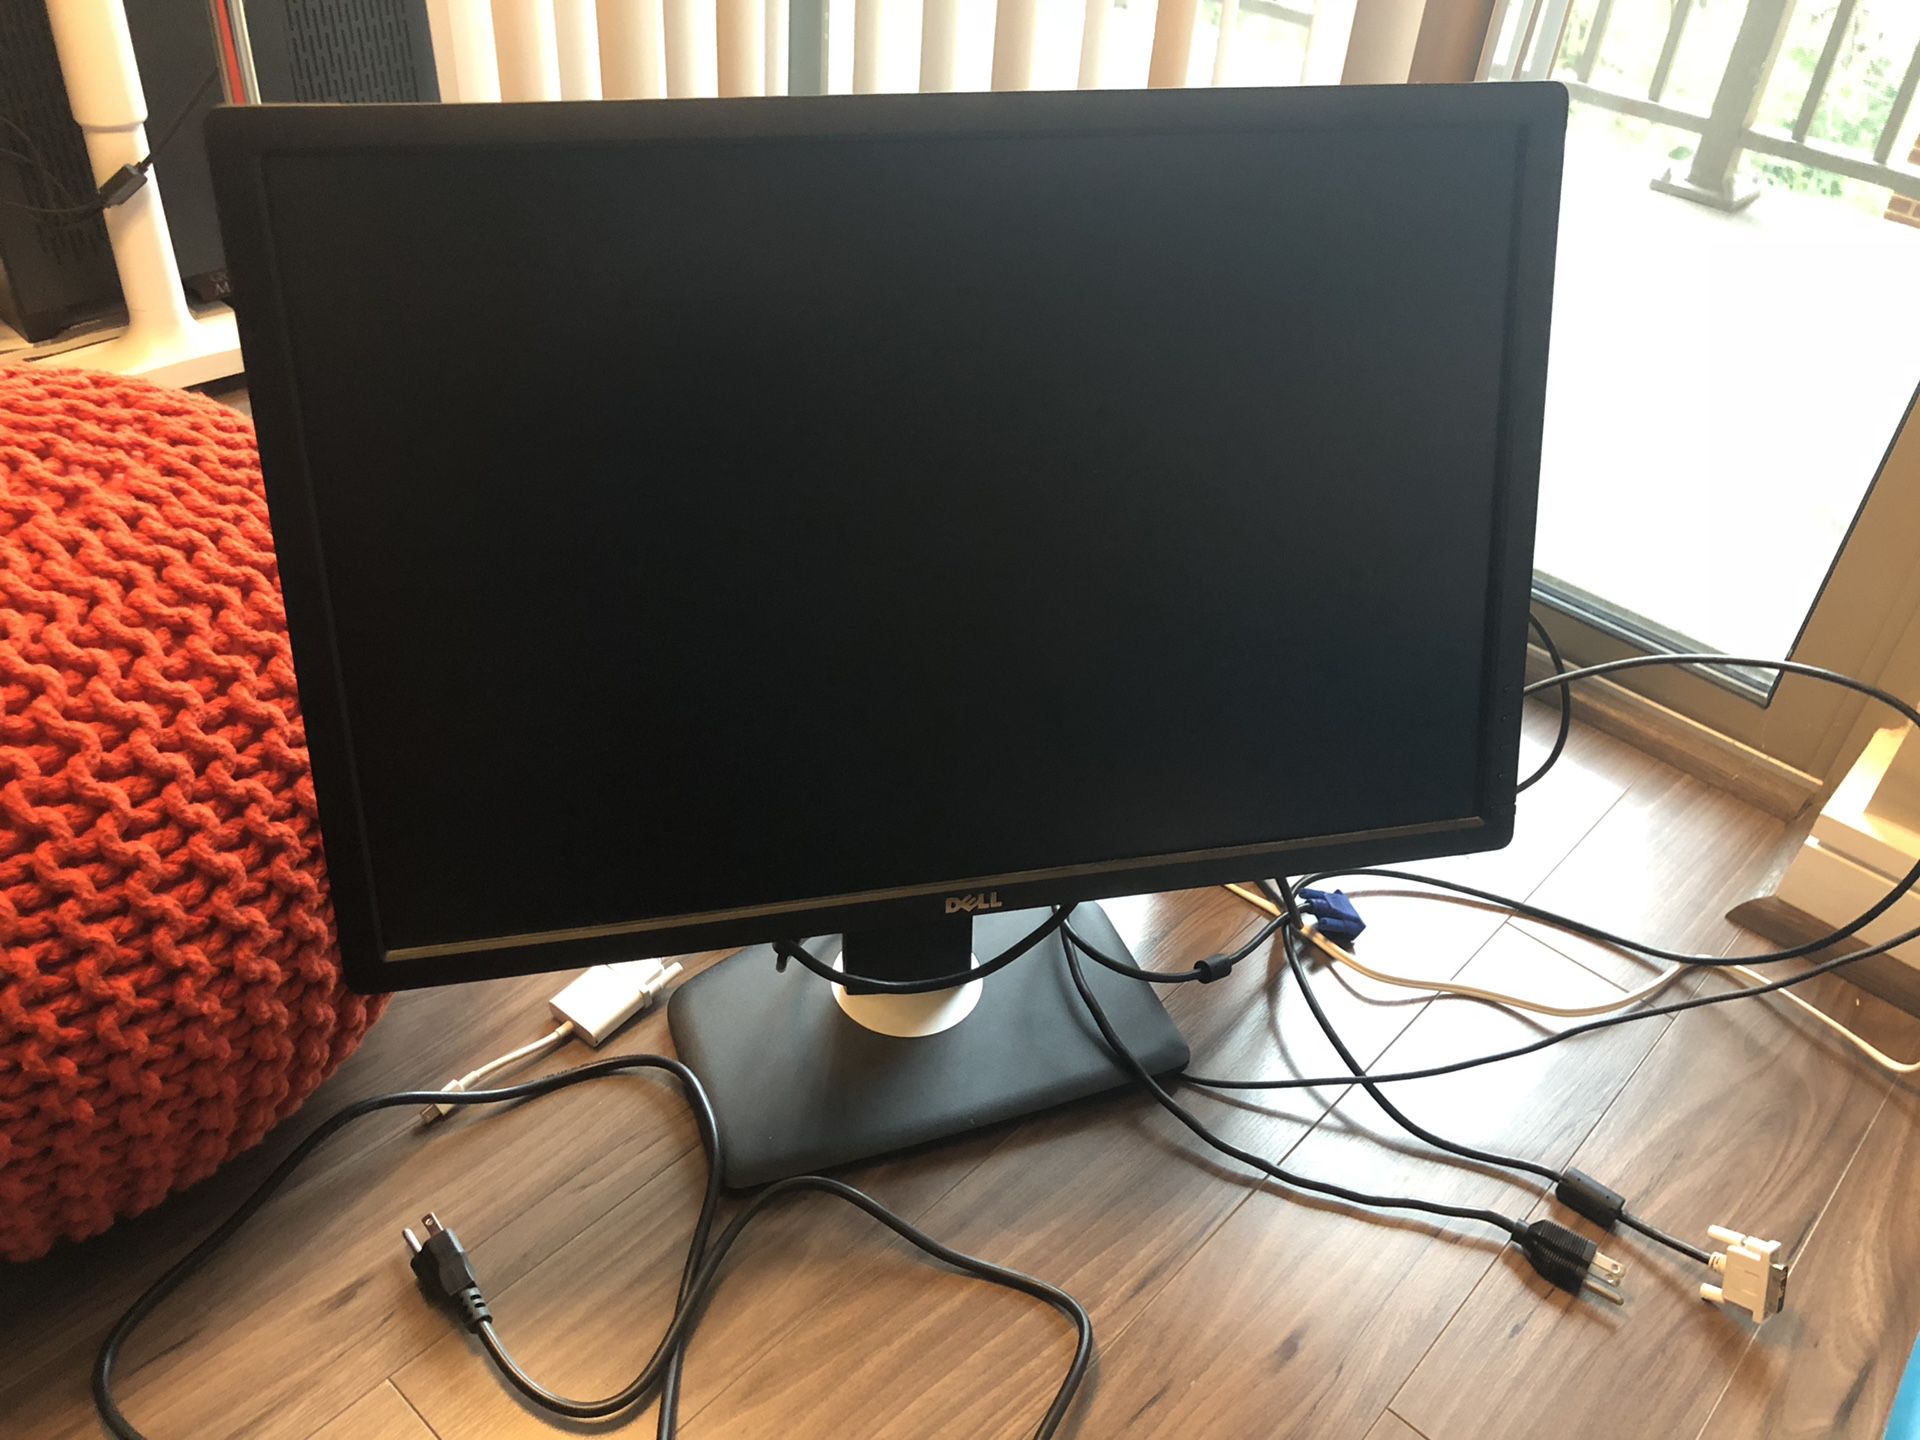 Dell Monitor 2412M, Viewsonic VX2452mh. Excellent quality, no damage at all.